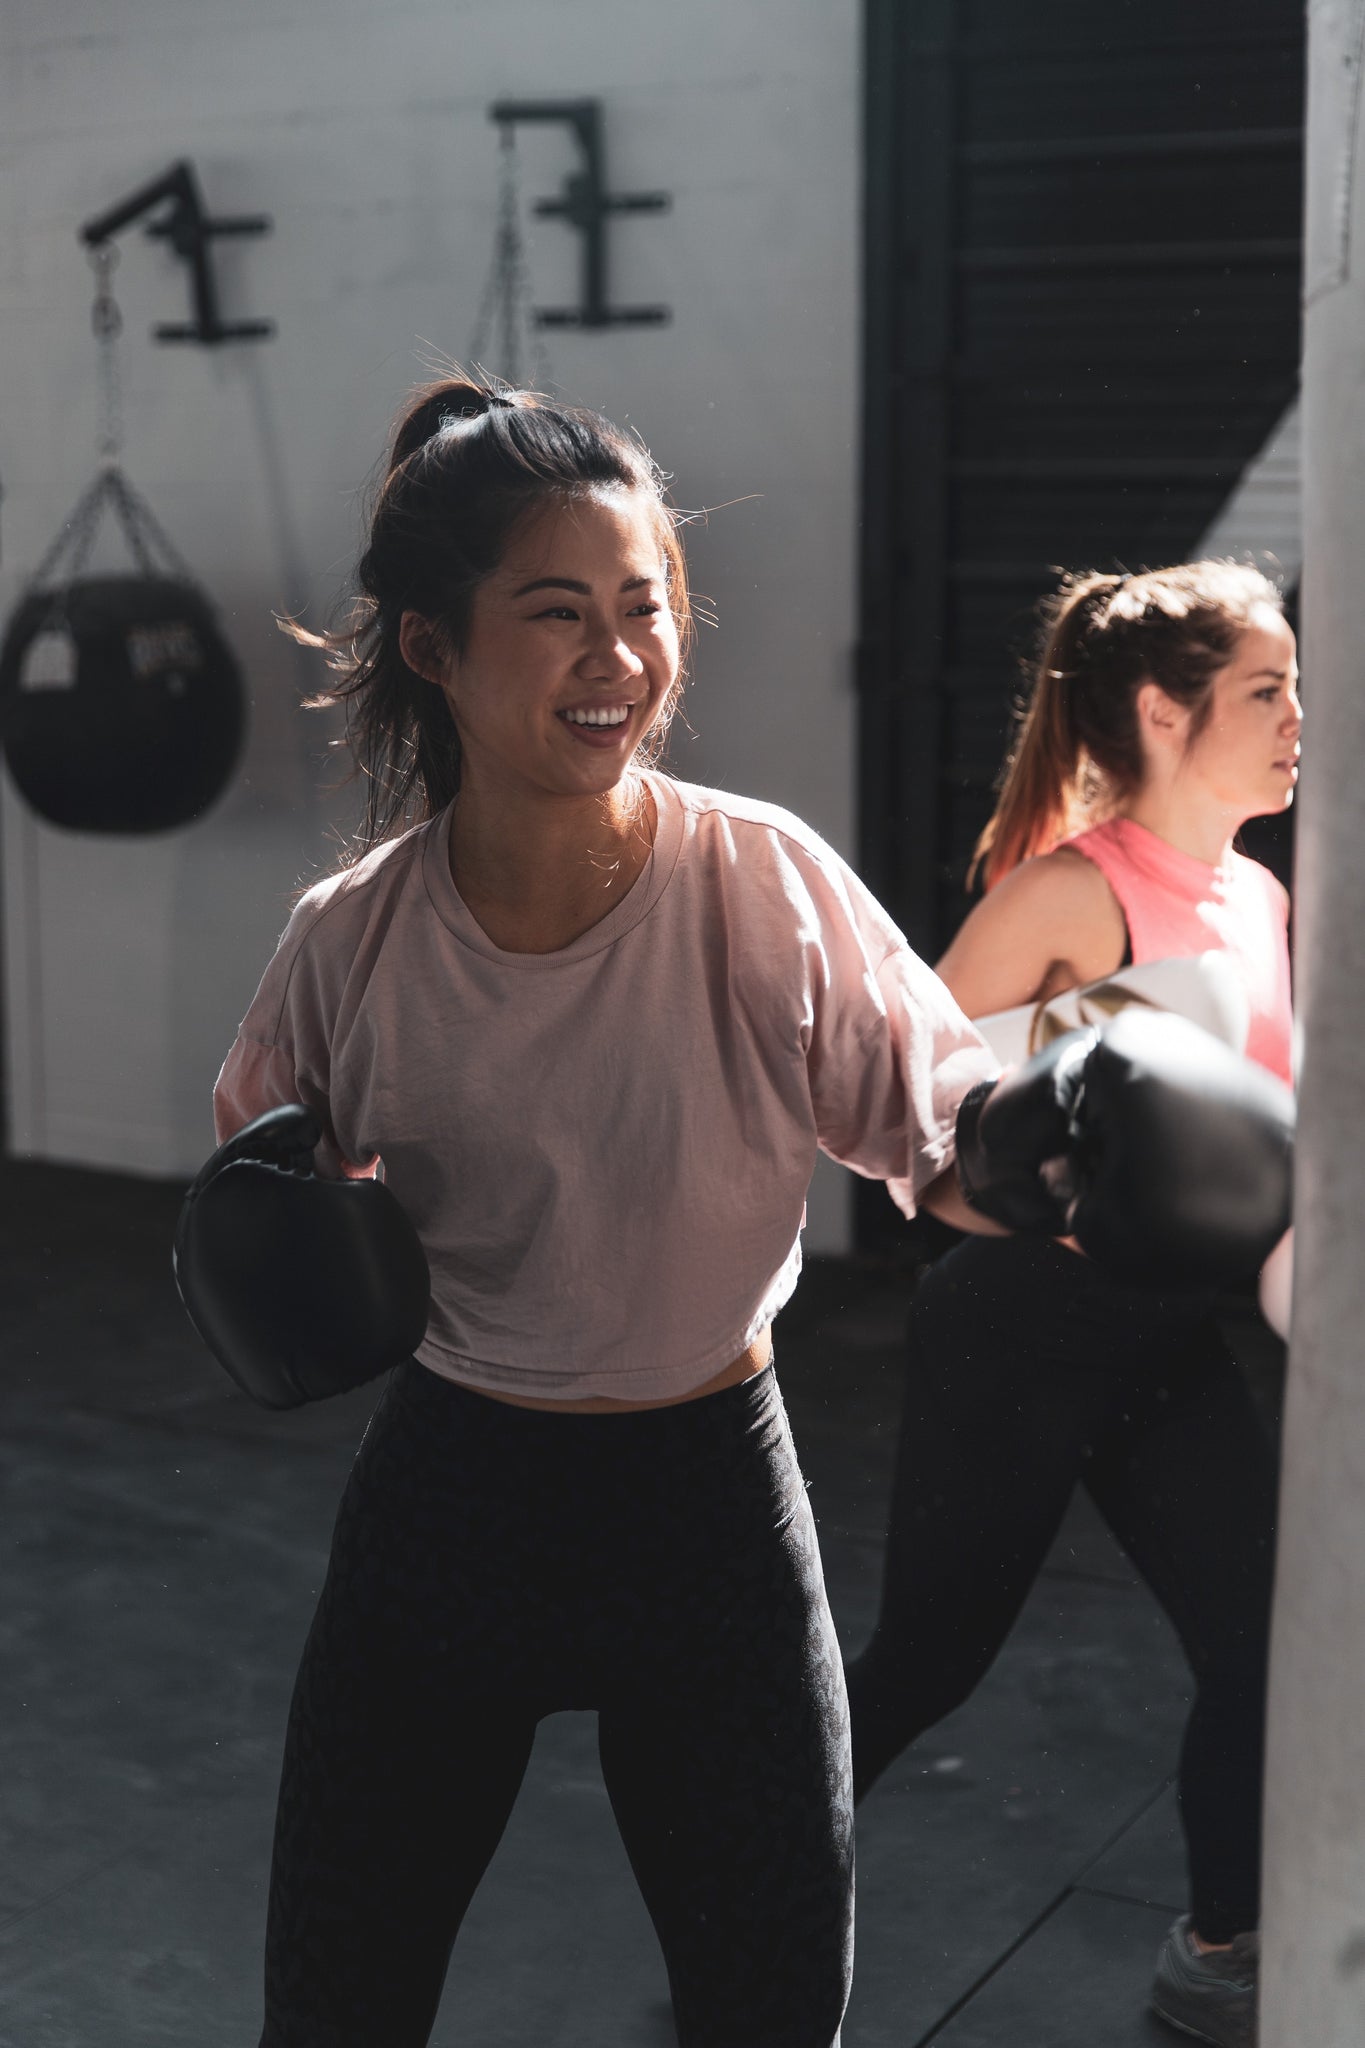 Support Hormones Naturally with PCOS – woman boxing and smiling